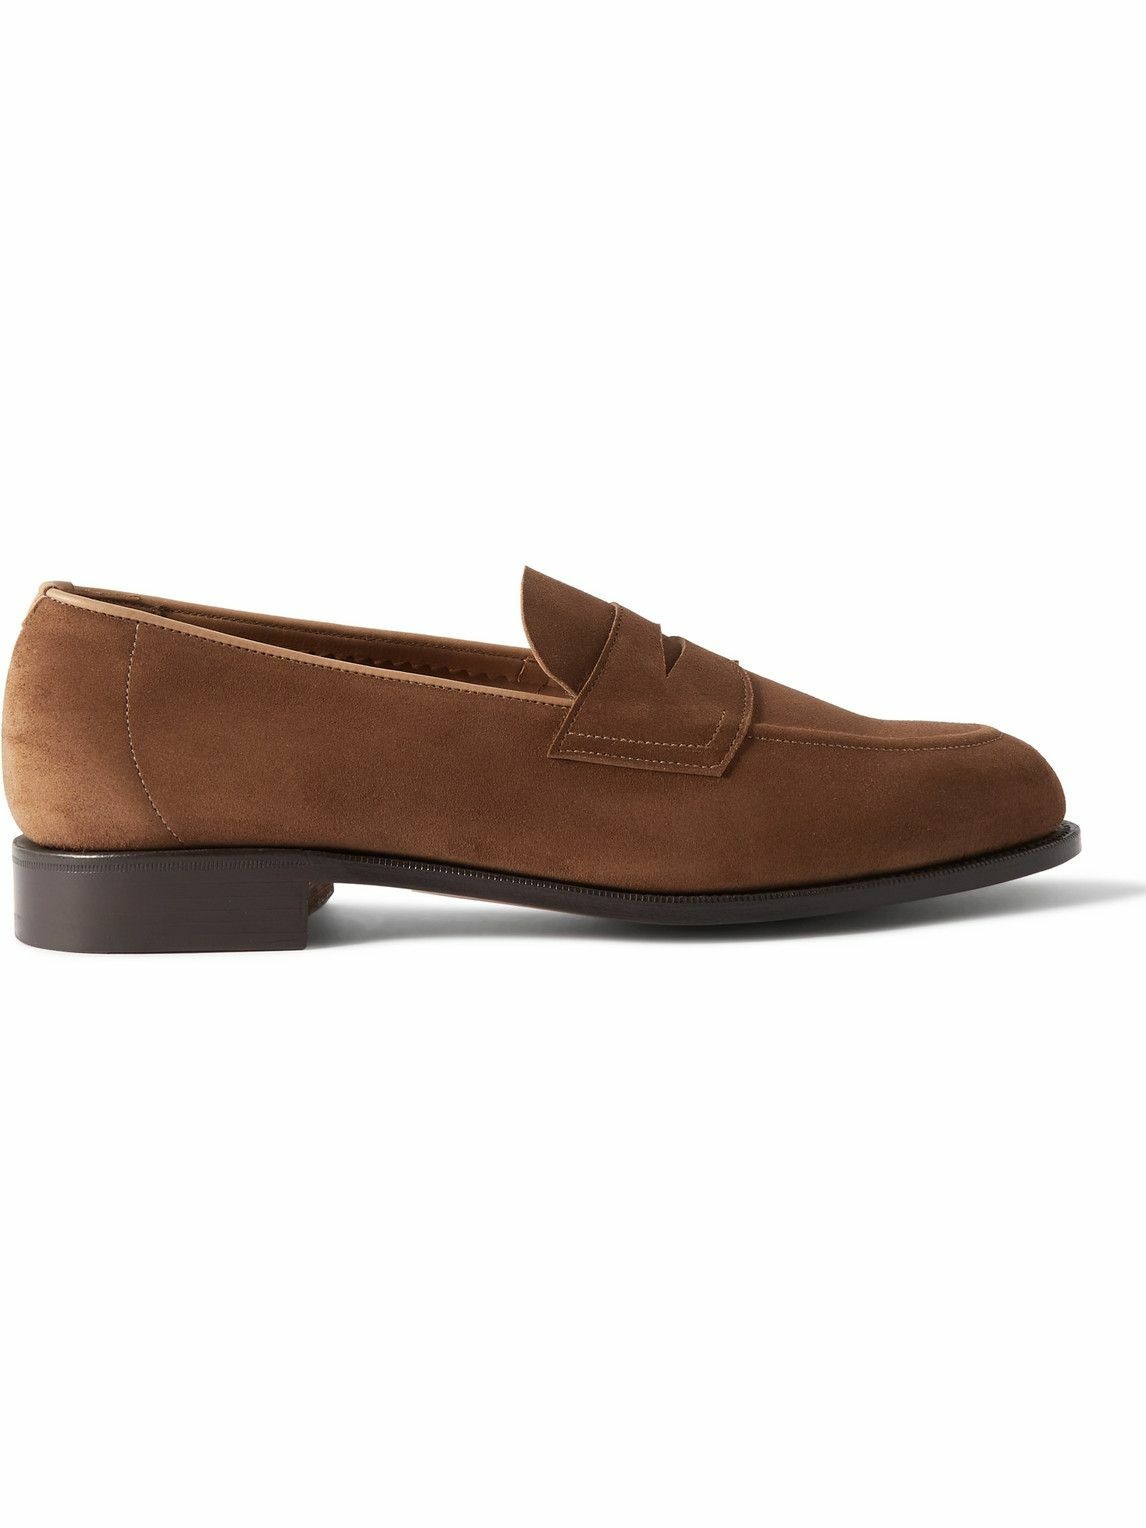 Photo: Edward Green - Picadilly Suede Penny Loafers - Brown